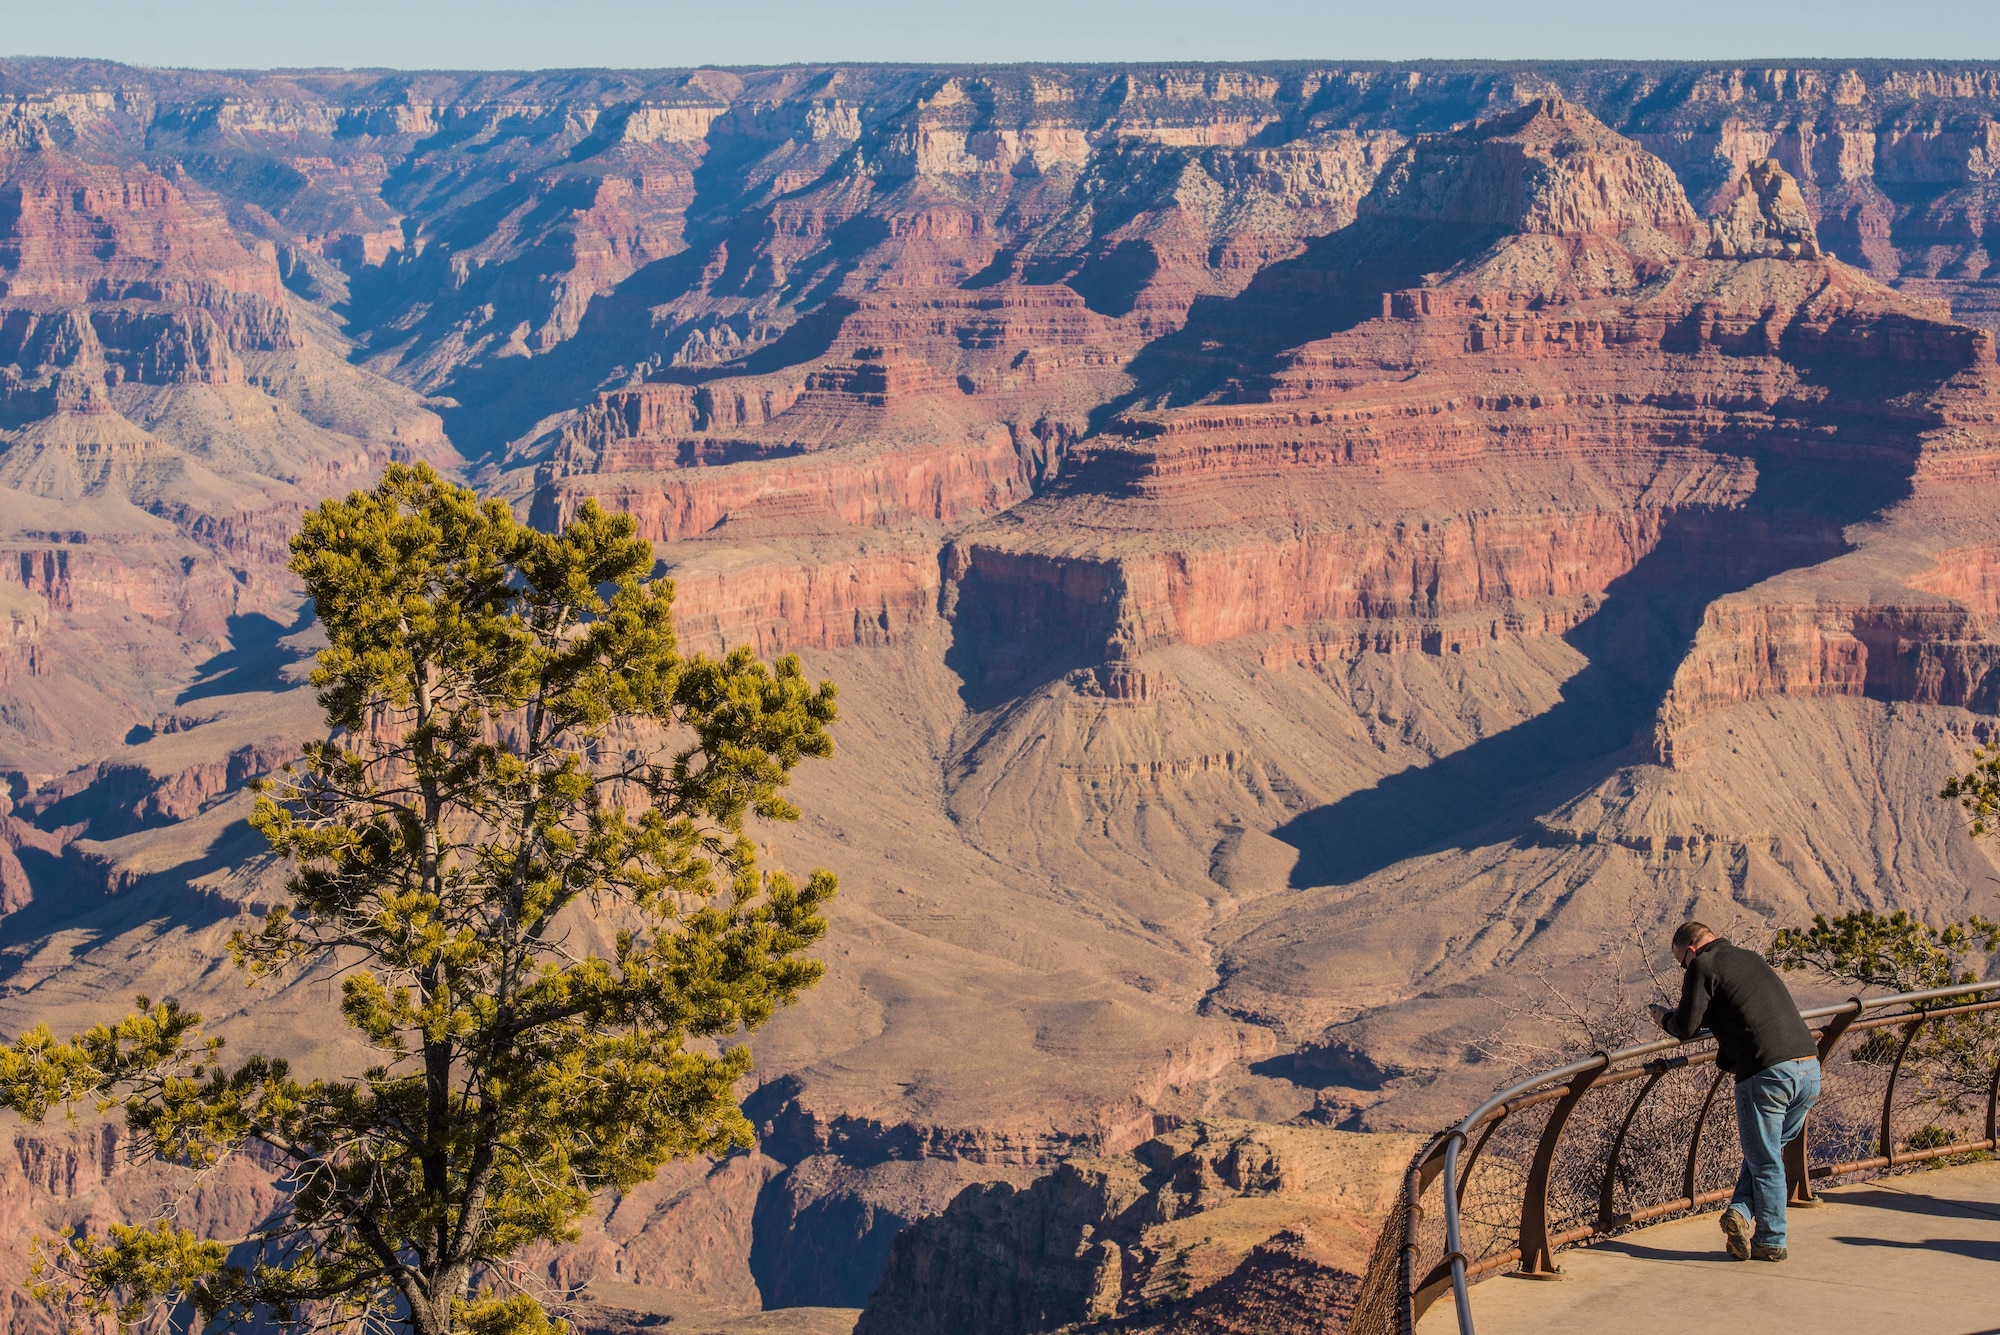 A visitor views the Grand Canyon from Mather Point in Grand Canyon National Park, Ariz., Jan. 27, 2018. For Airmen stationed at Luke Air Force Base, the Grand Canyon is one of the most popular destinations which they can visit while stationed in Arizona. (U.S. Air Force photo/Airman 1st Class Caleb Worpel)